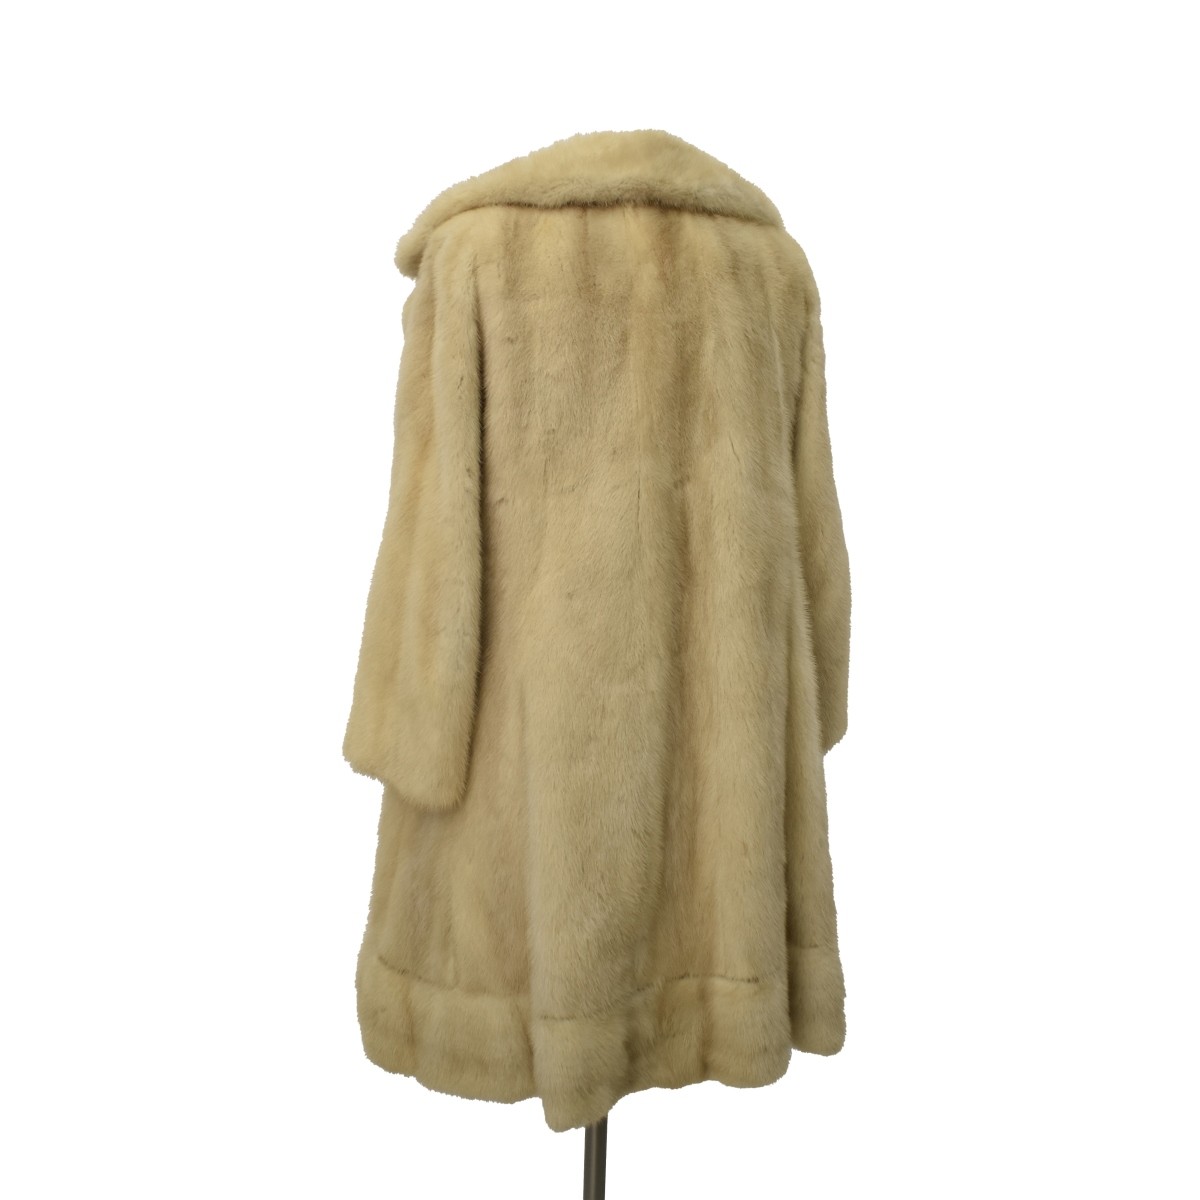 Blond Mink Coat with Matching Hat